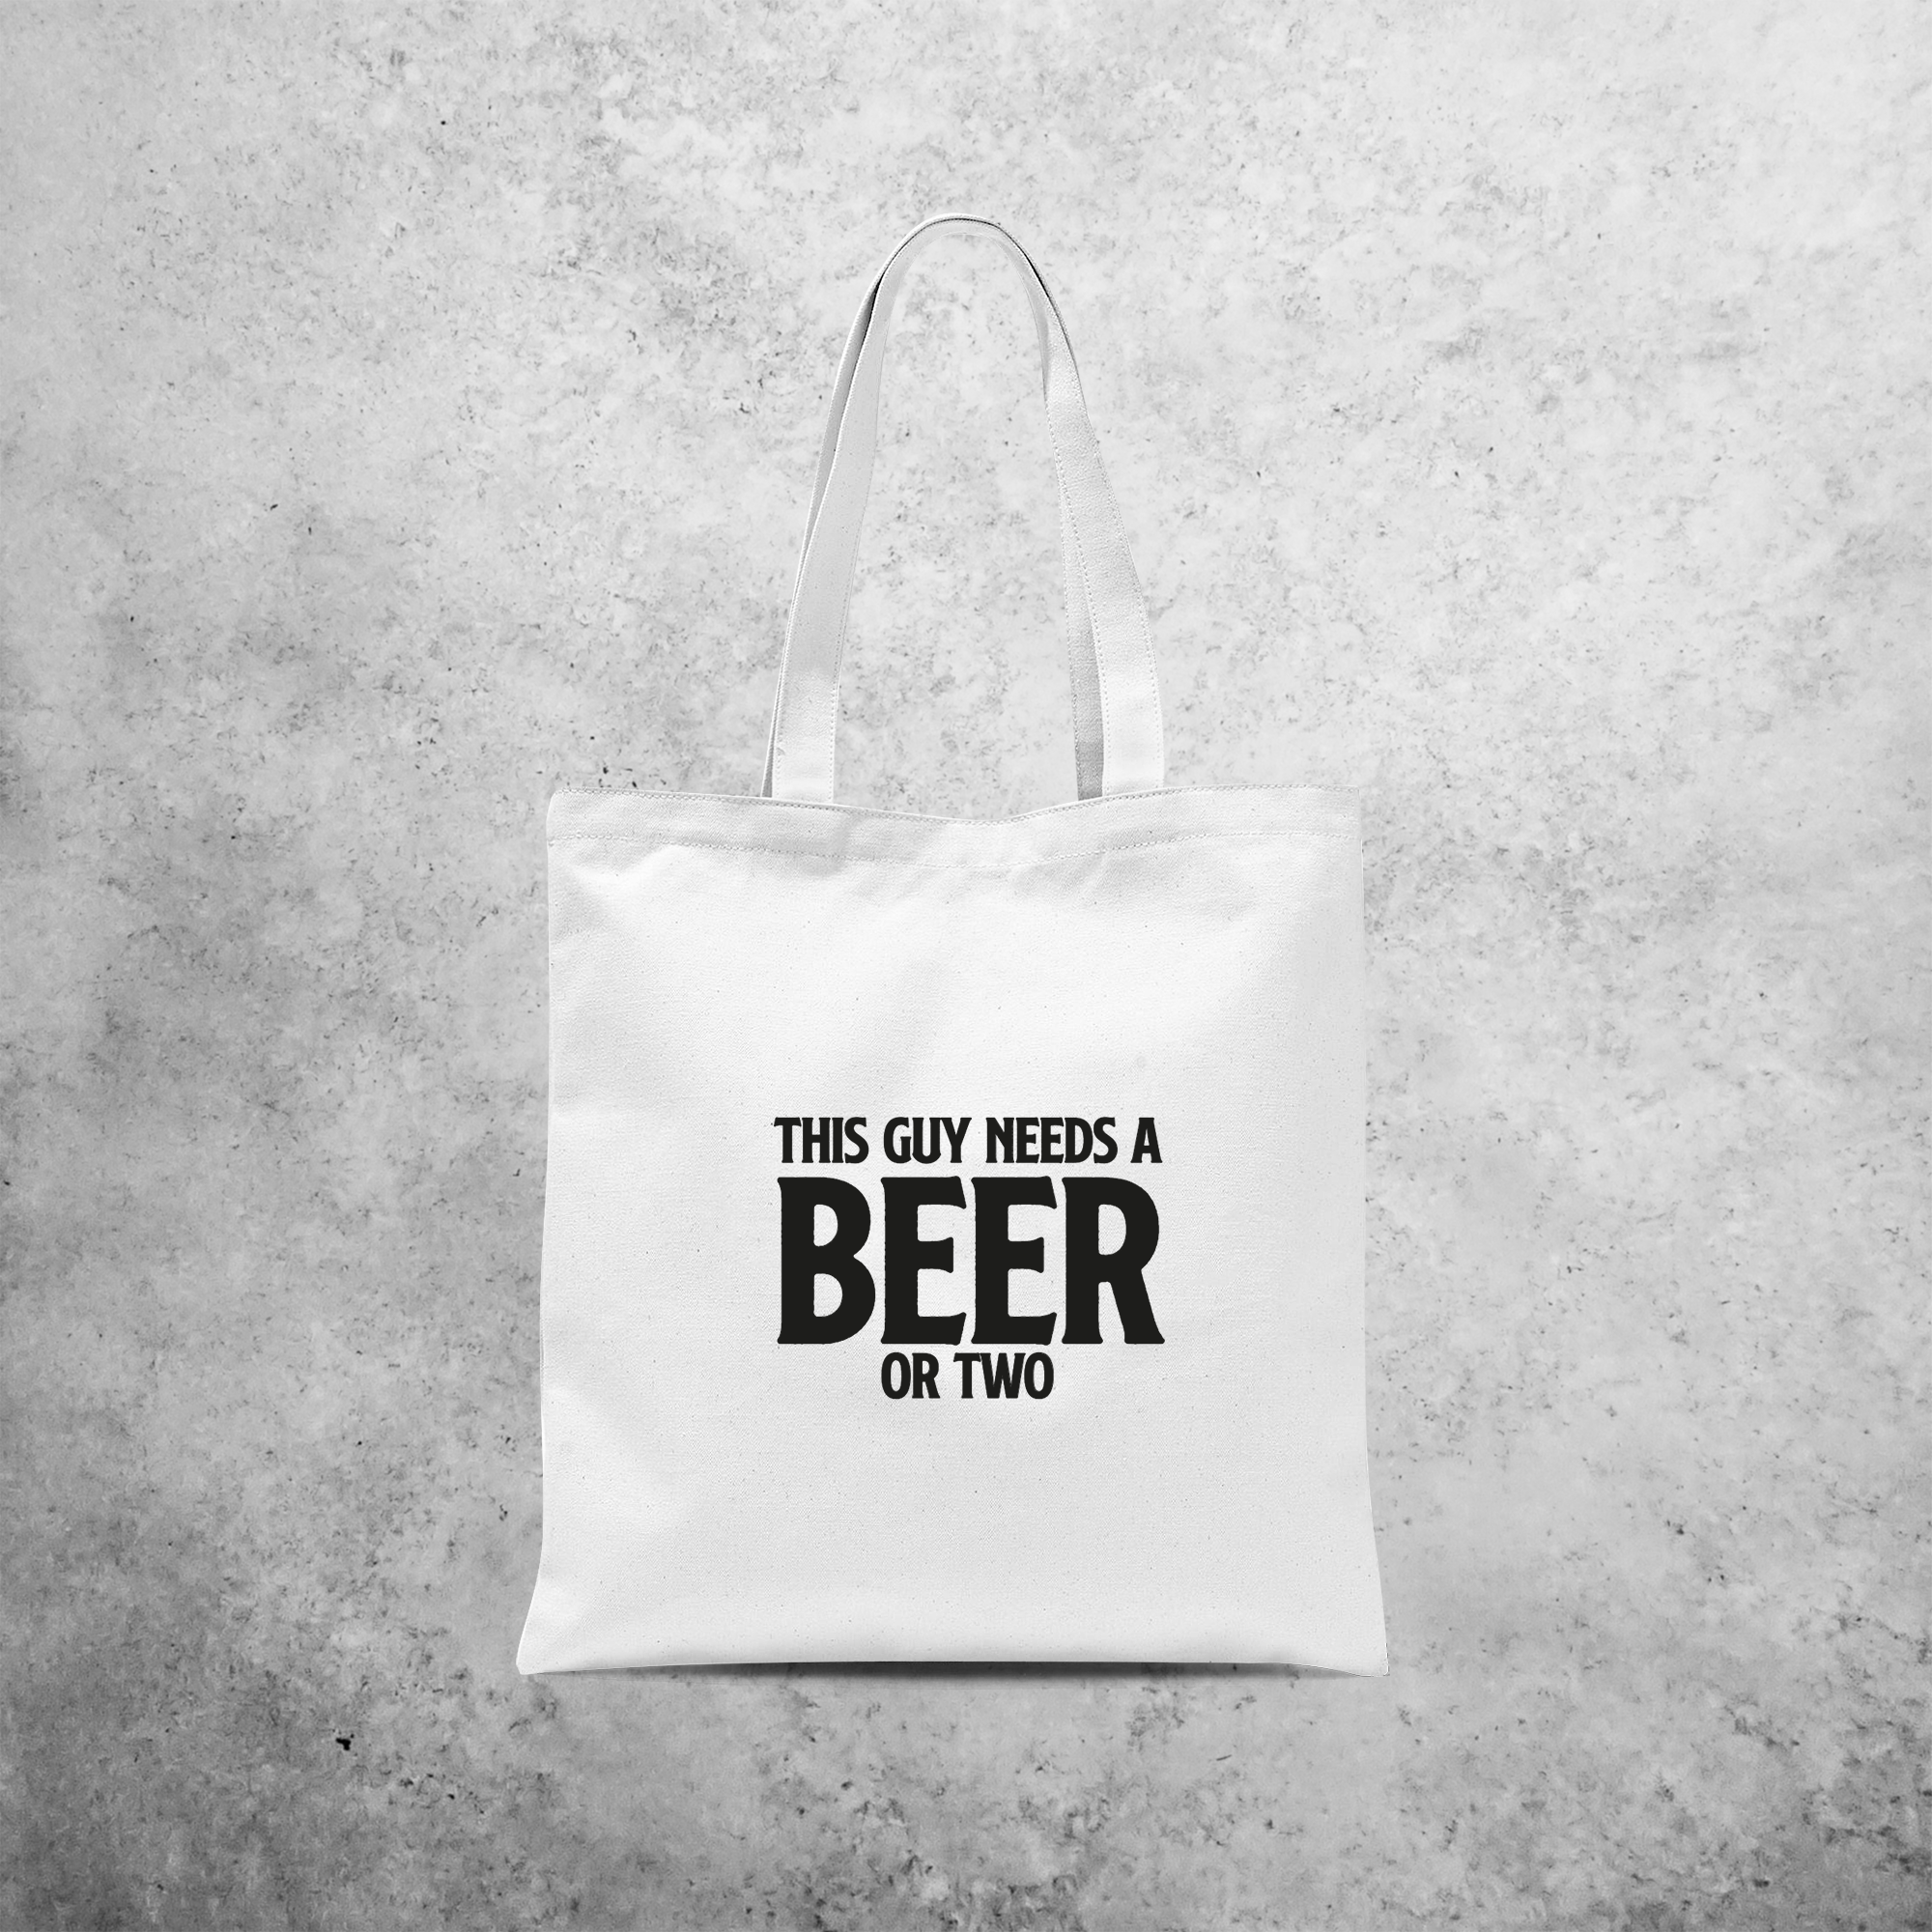 'This guy needs a beer or two' tote bag